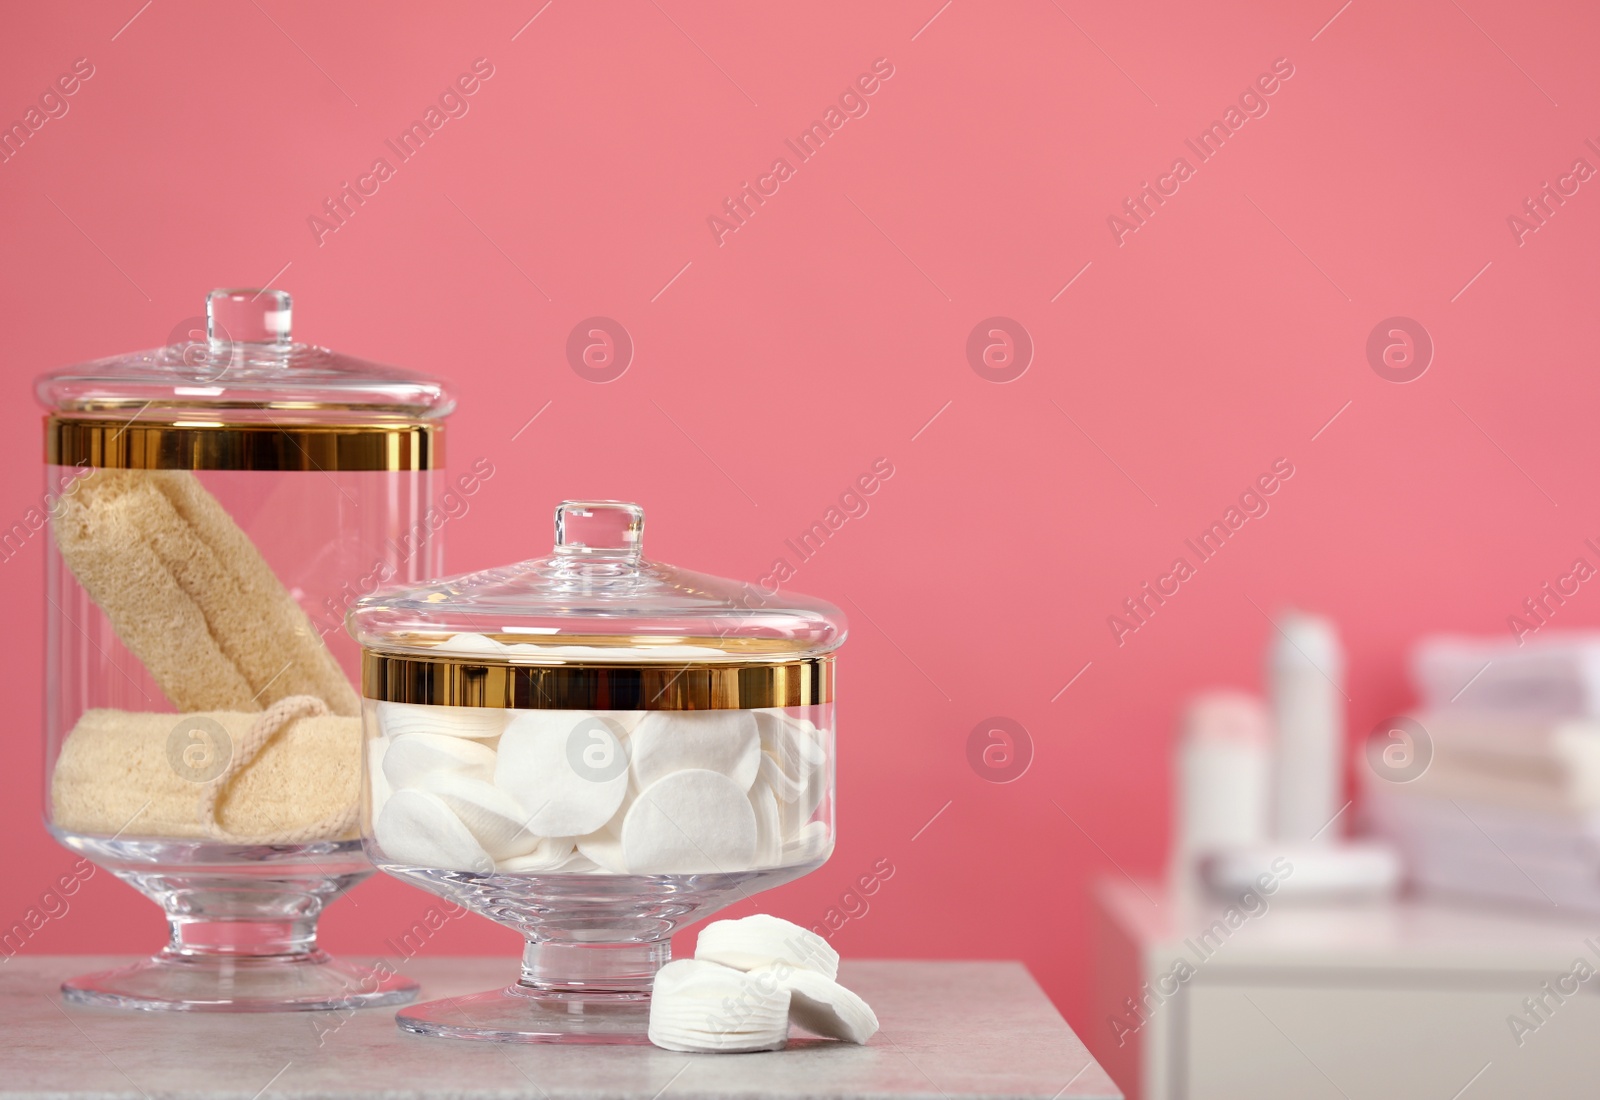 Photo of Composition of glass jars with cotton pads on table against pink background. Space for text